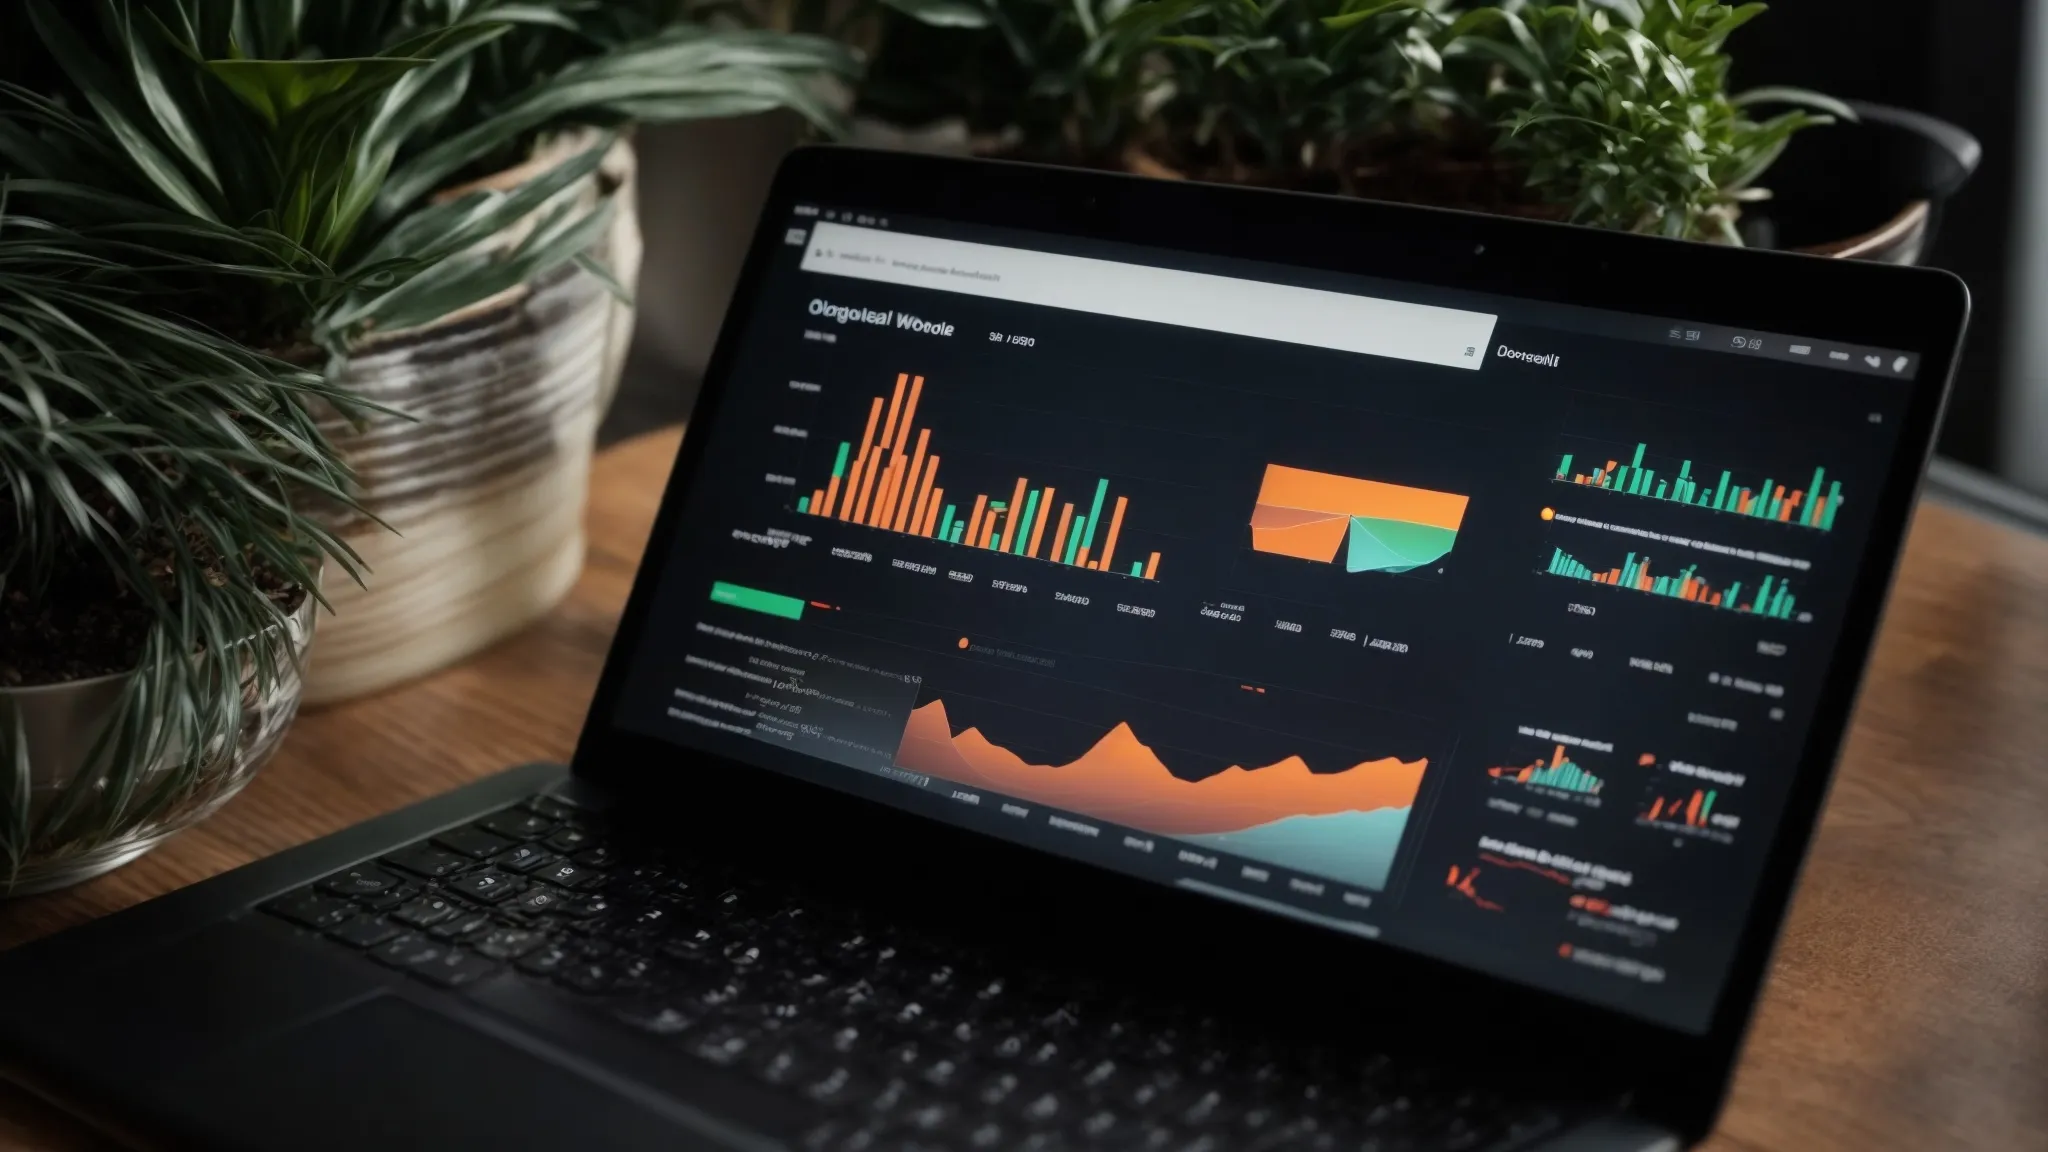 a close-up view of a laptop showing graphs and analytics on the screen, set on a wooden desk with a potted plant aside, symbolizing digital marketing analysis in action.